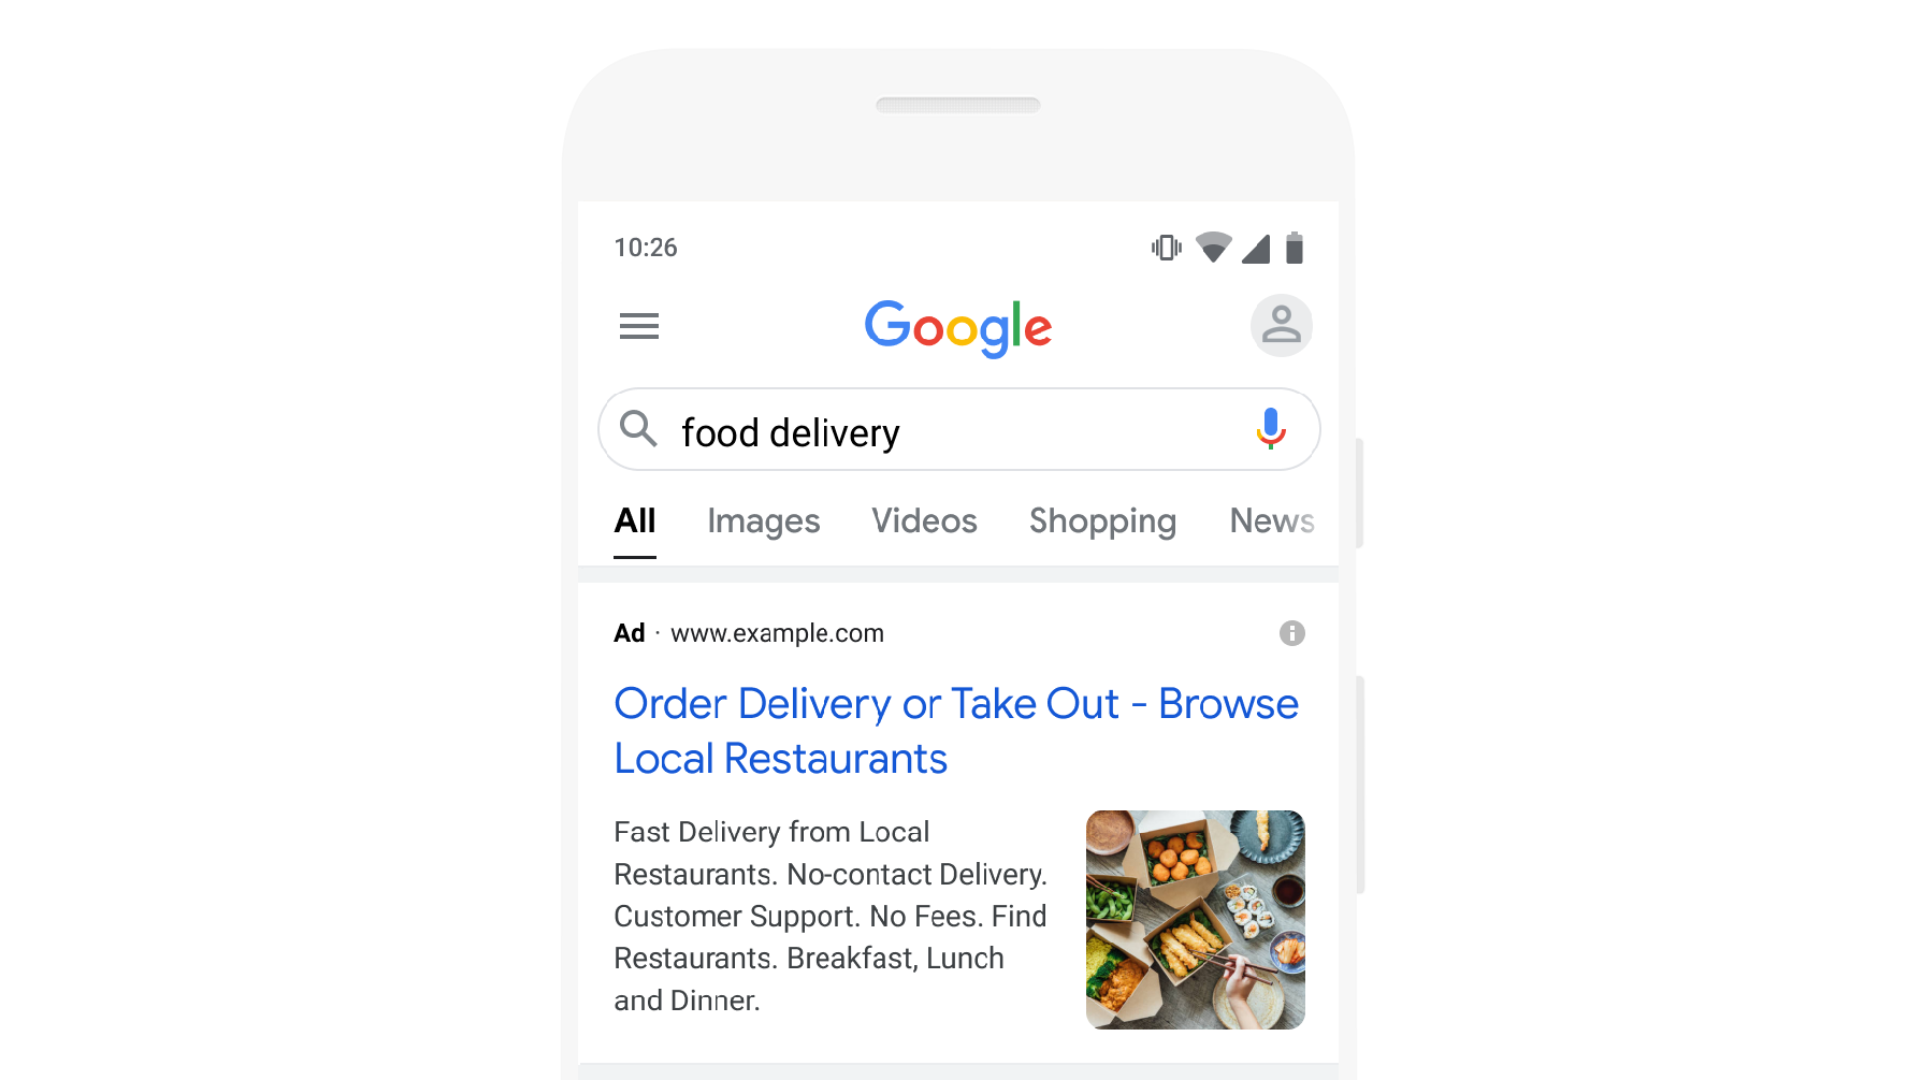 Google rolls out images in Search Ads globally